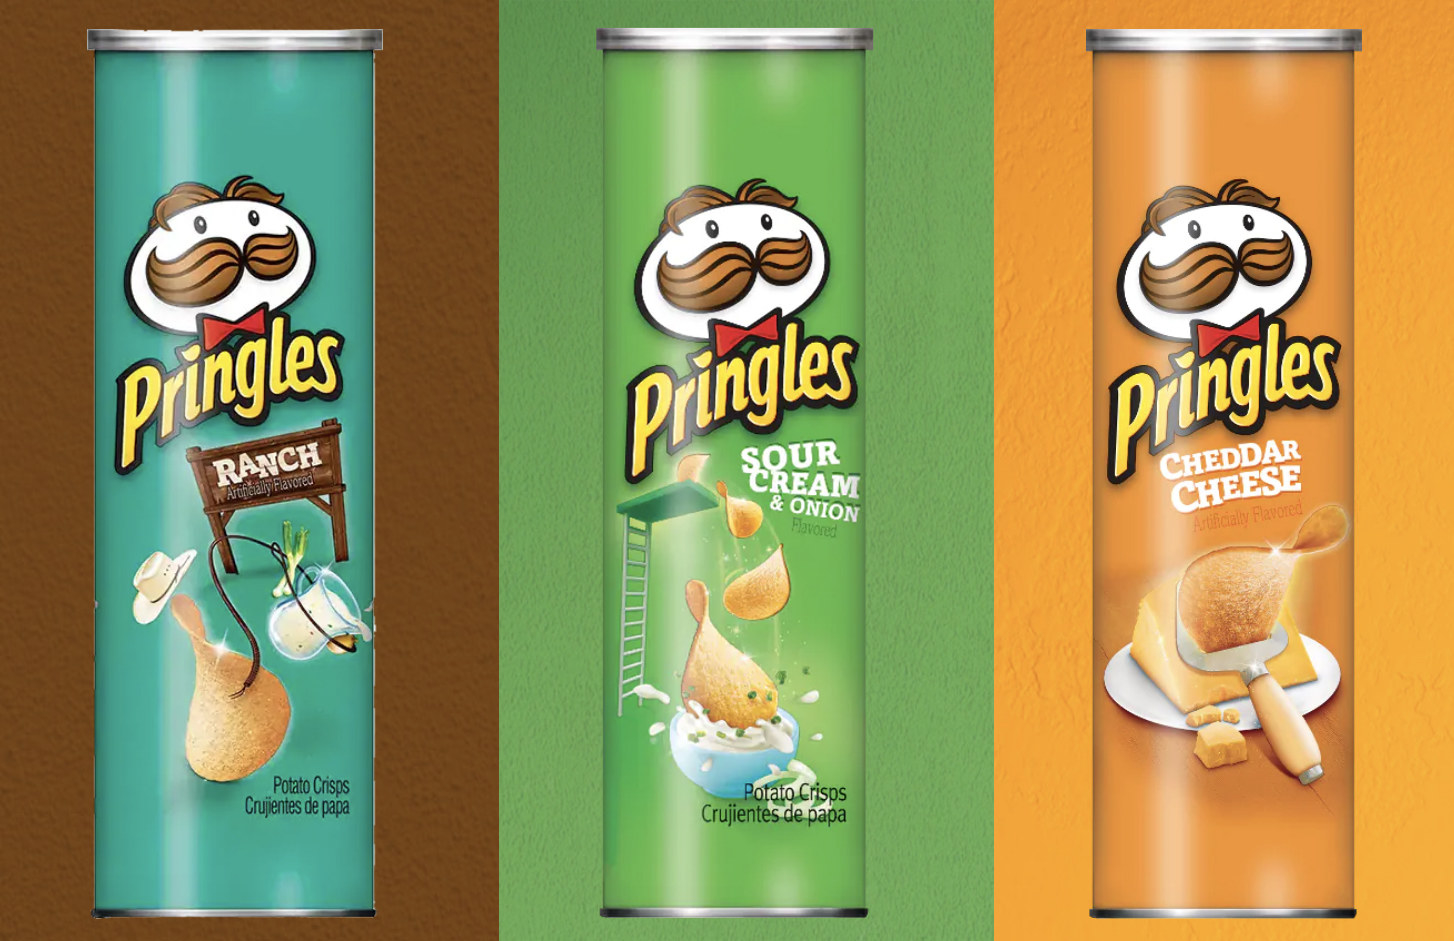 Is This A Real Pringles Flavor Or Something I Just Made Up? 